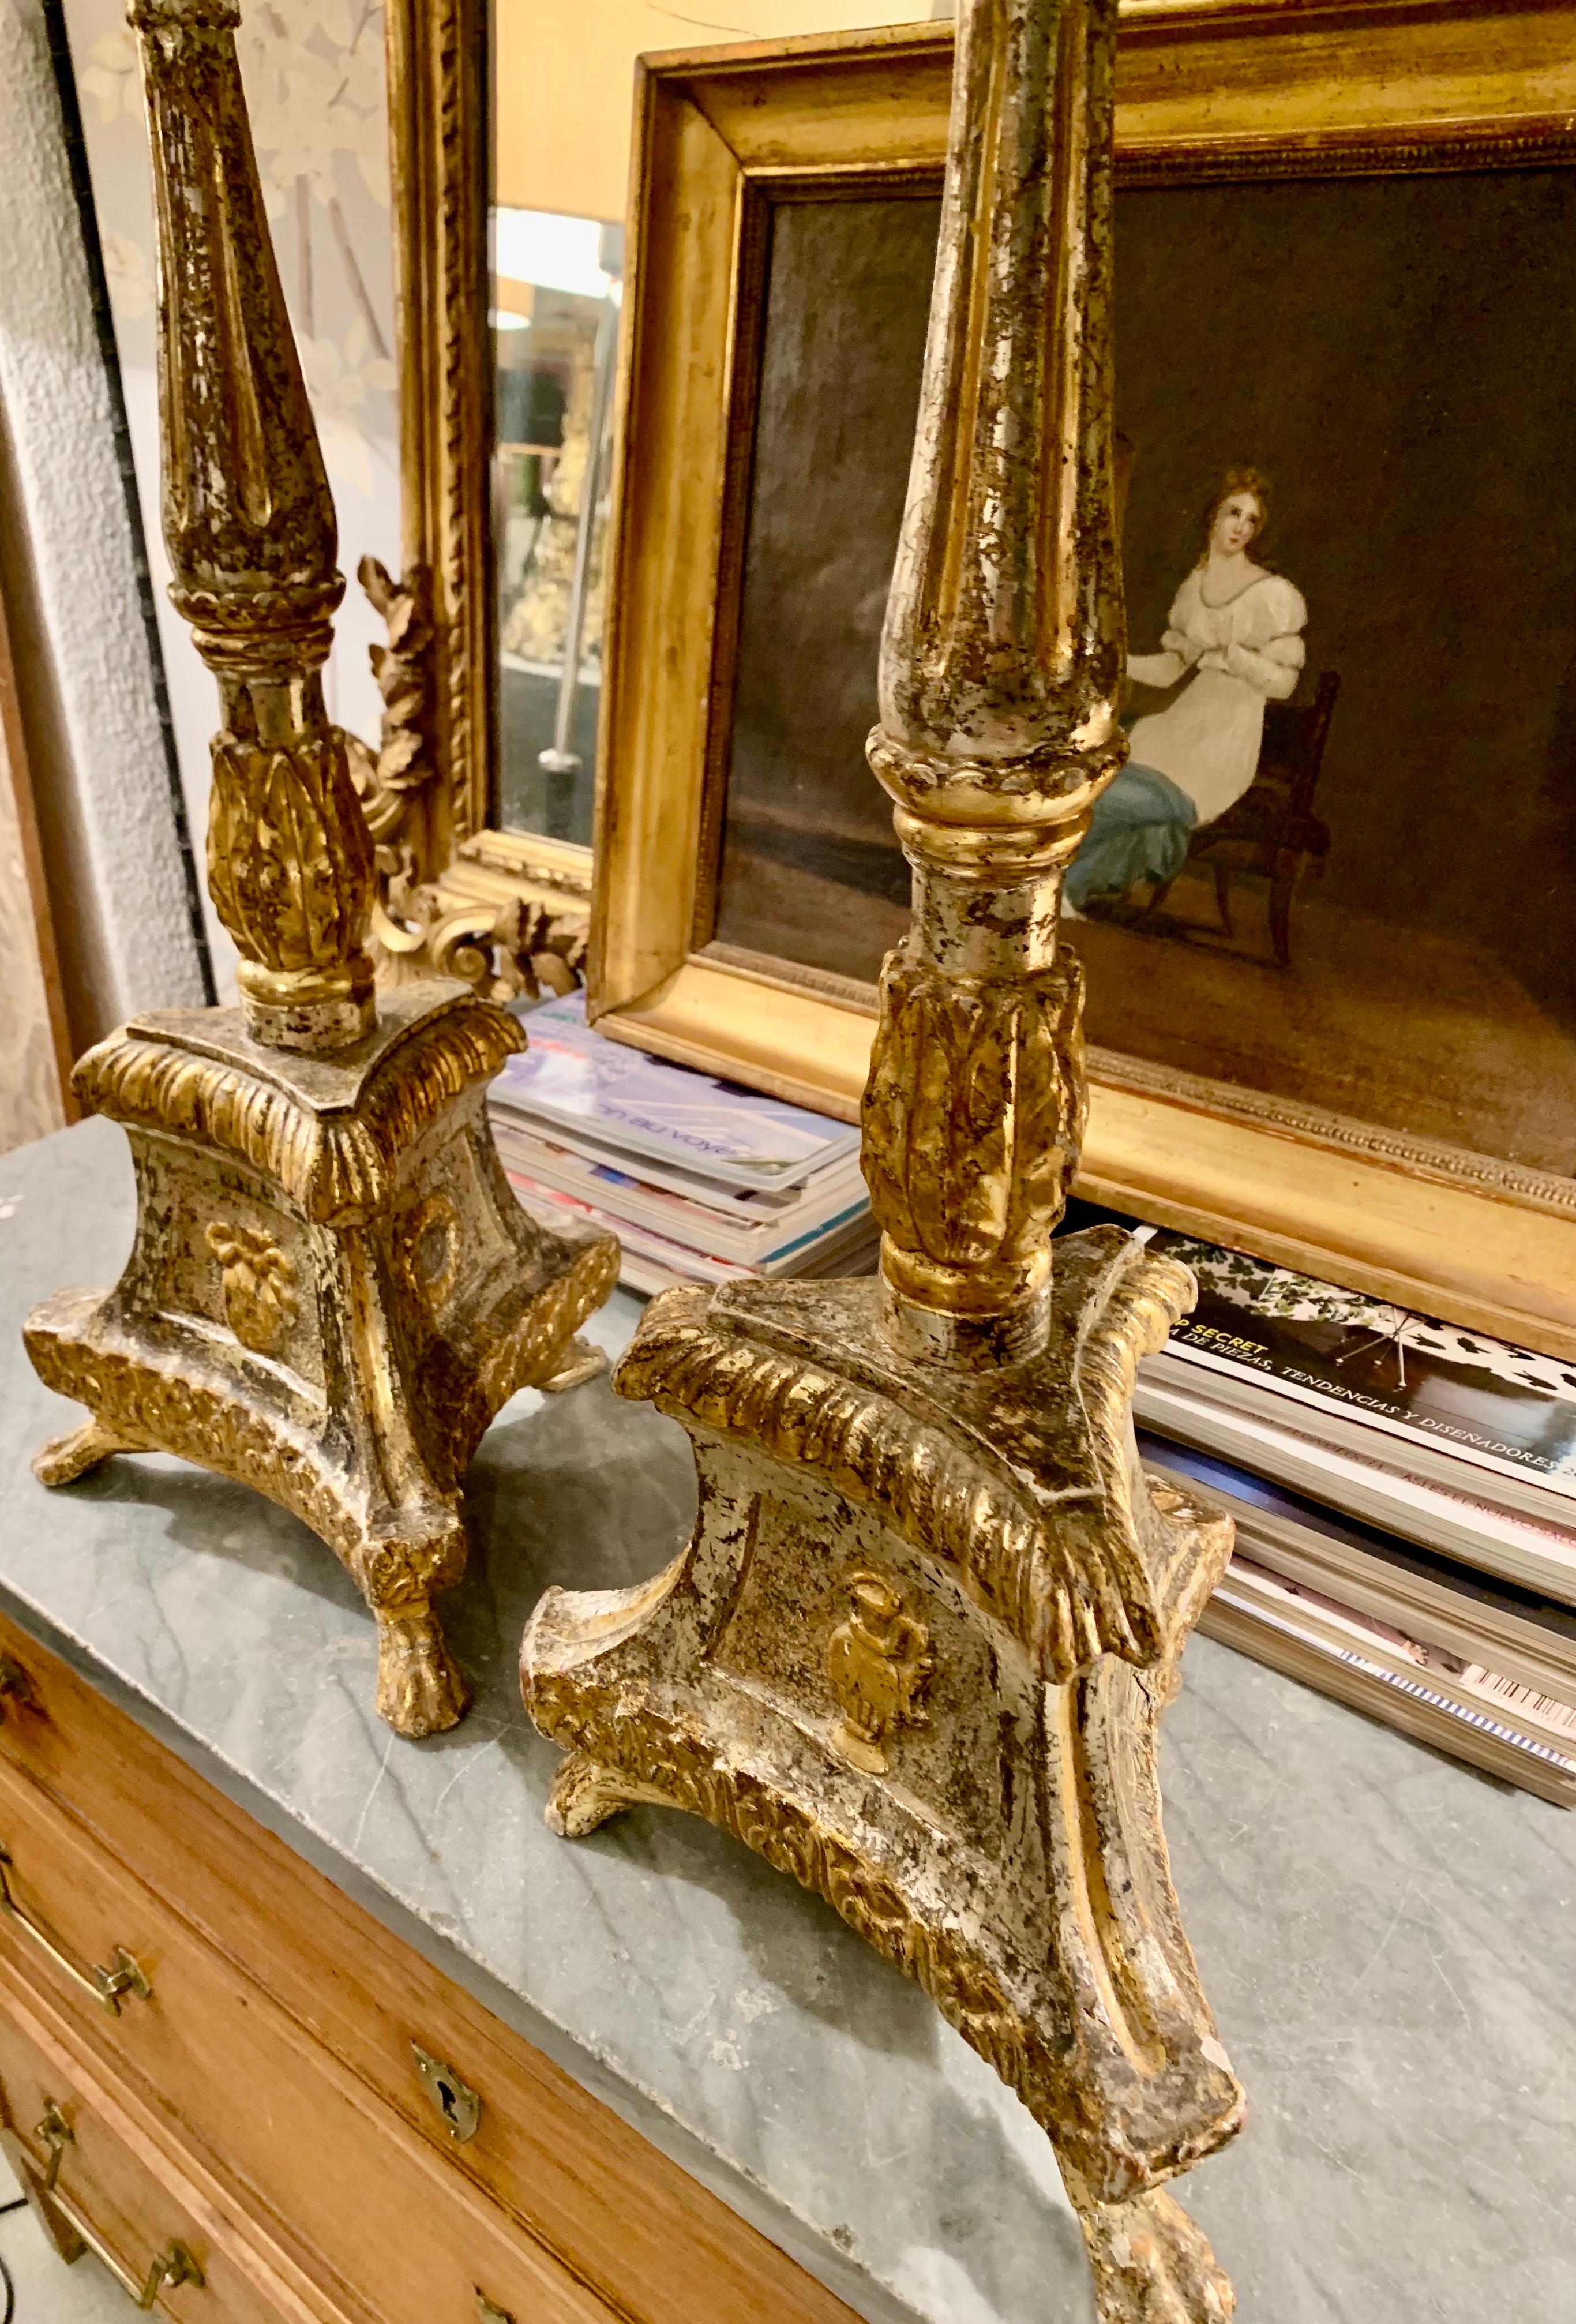 A pair of beautiful Spanish torcheros, probably the end of the 18th century, in gilt wood and silver wood, their base is triangular supported on legs in the shape of a lion's claw, they have a beautiful patina, and they have different decorative